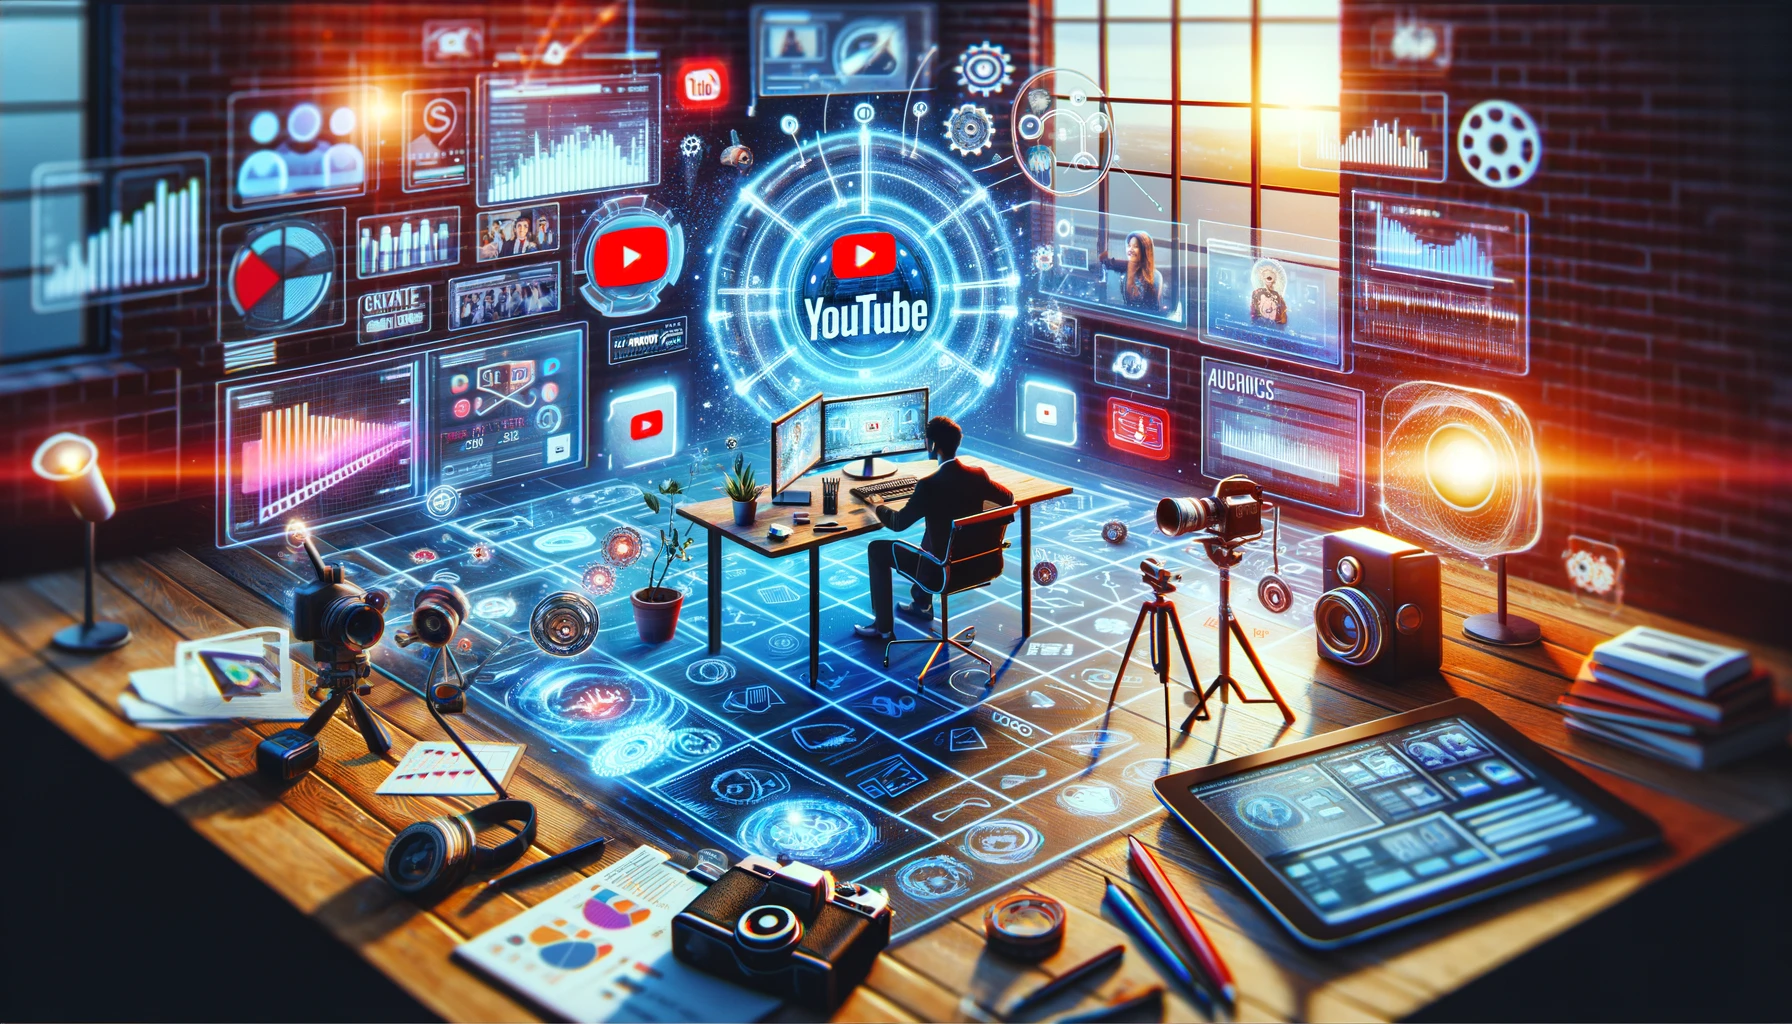 Illustration of effective techniques for Promoting YouTube Channel, featuring a content creator engaging with analytics and social media.